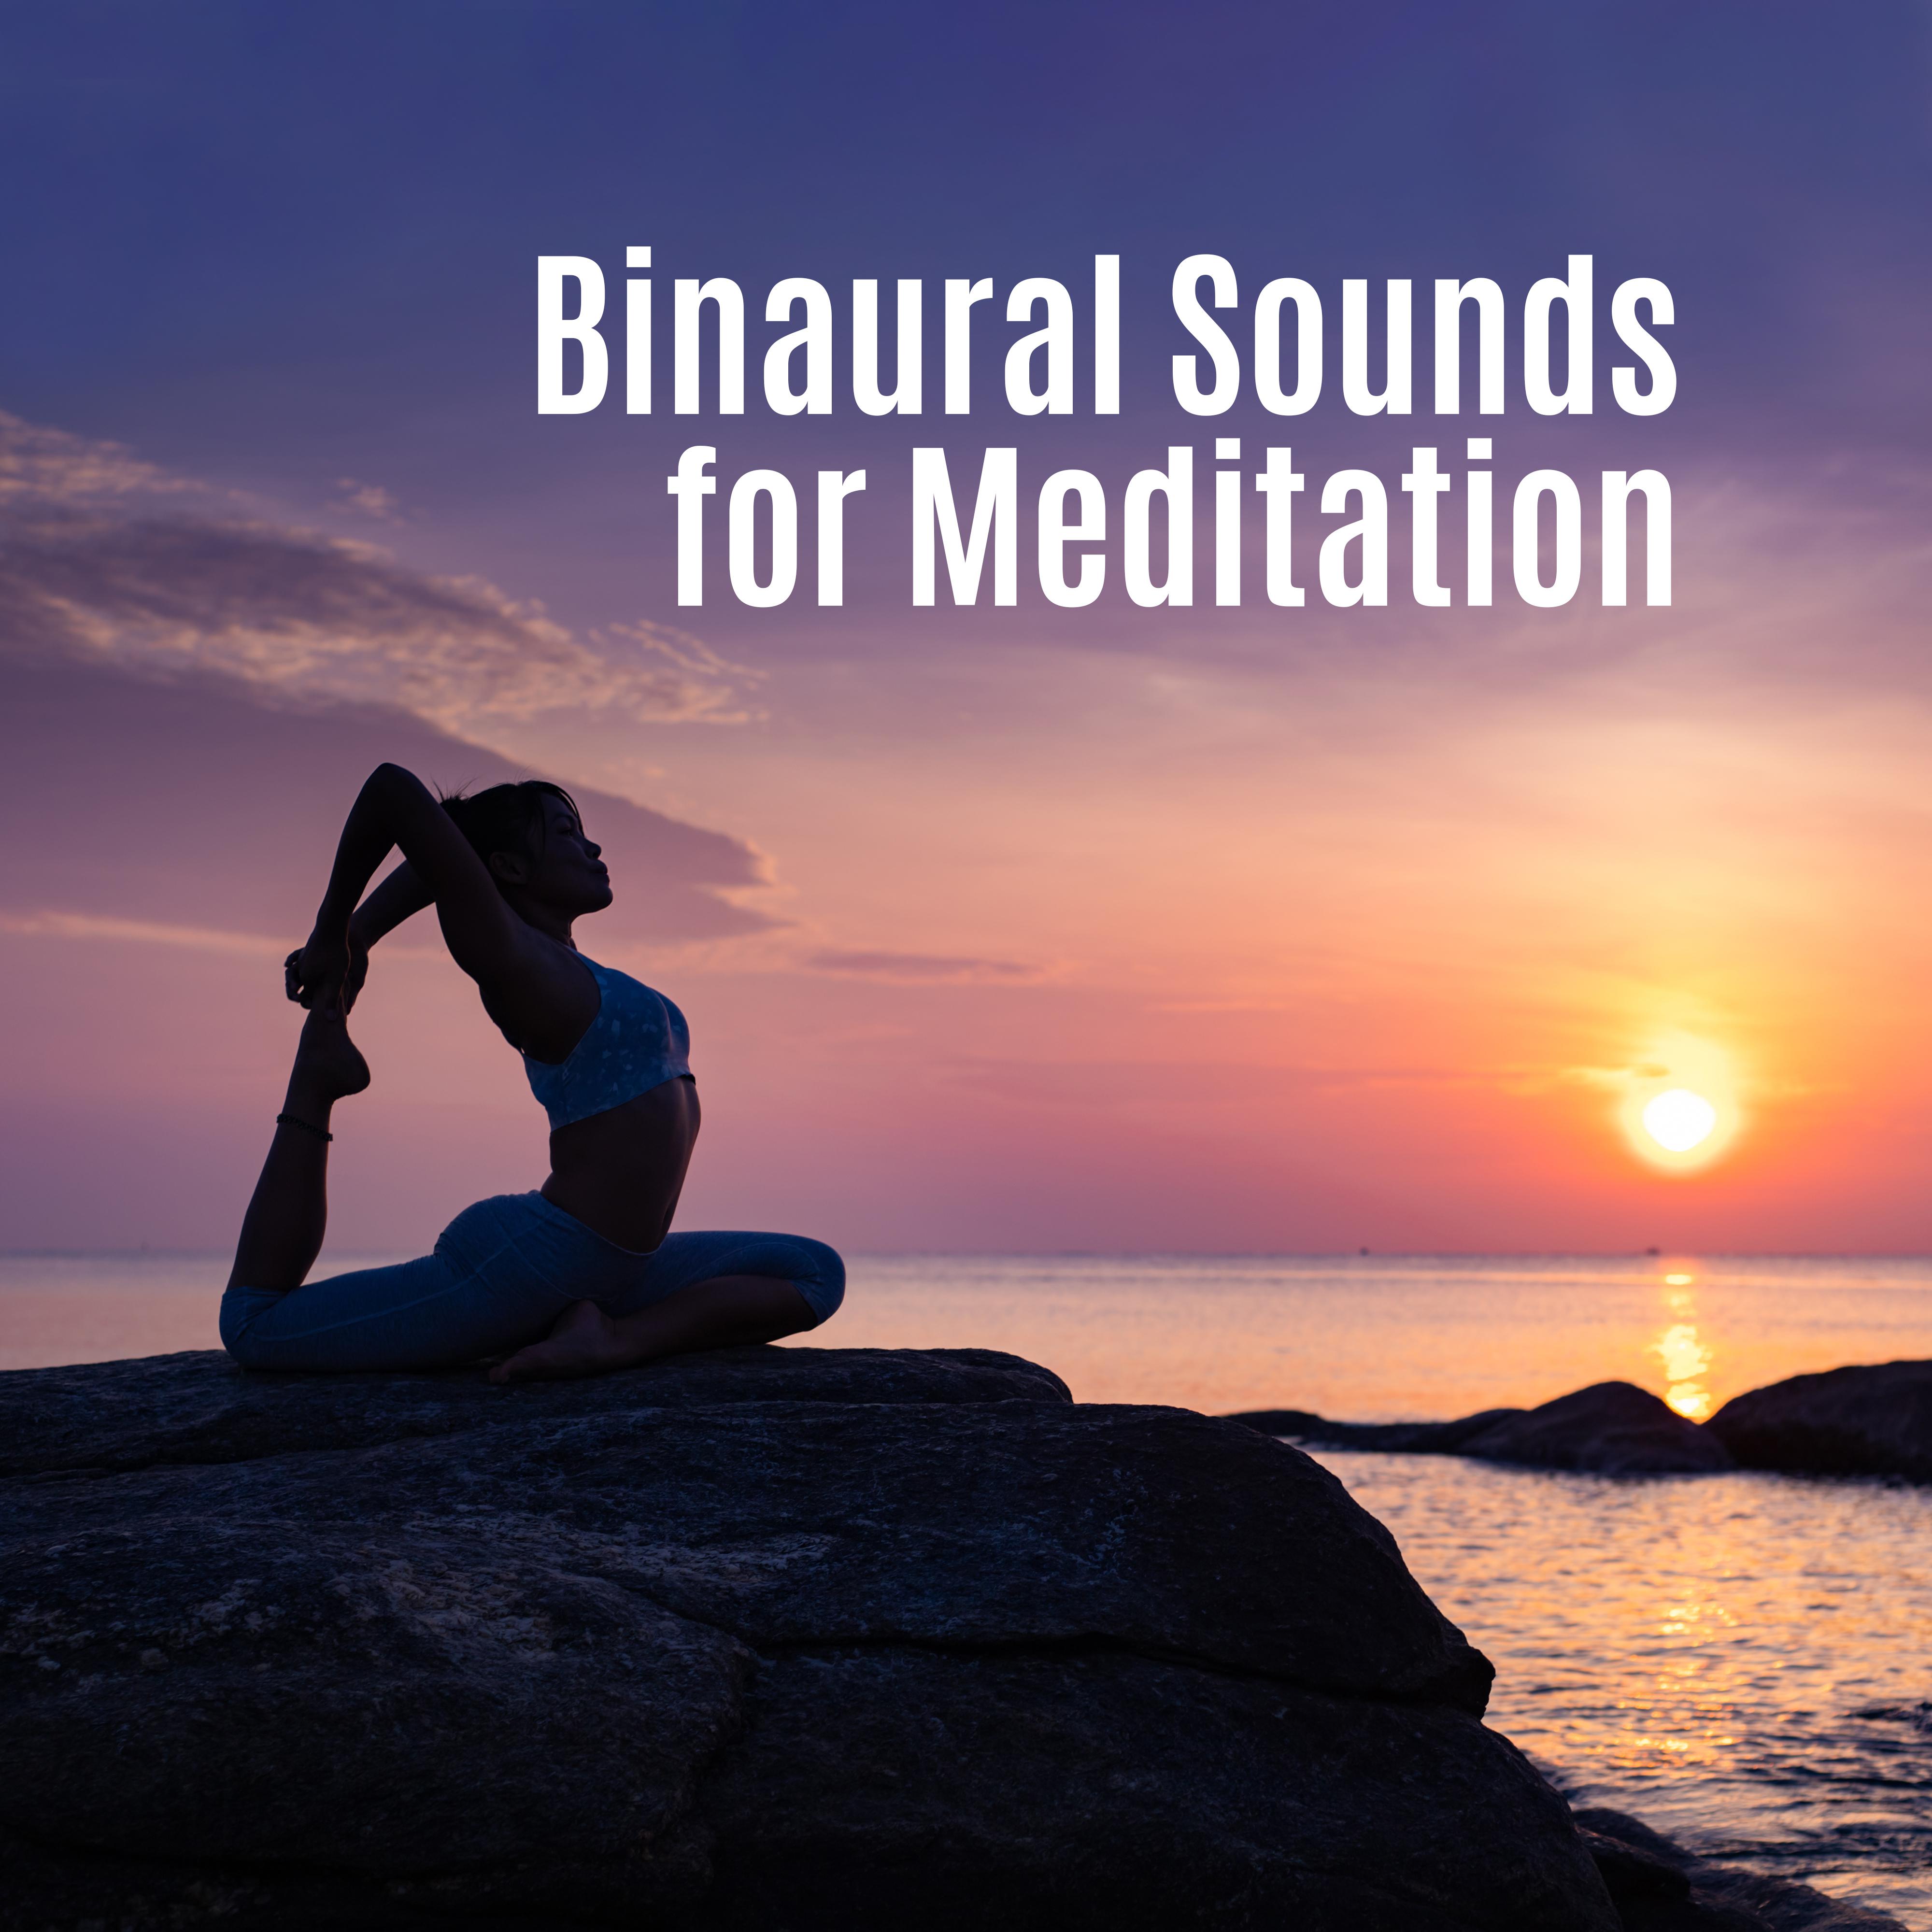 Binaural Sounds for Meditation: Ambient Meditation Music Created for Meditation at Bedtime, Evening Yoga or for Easier Falling Asleep